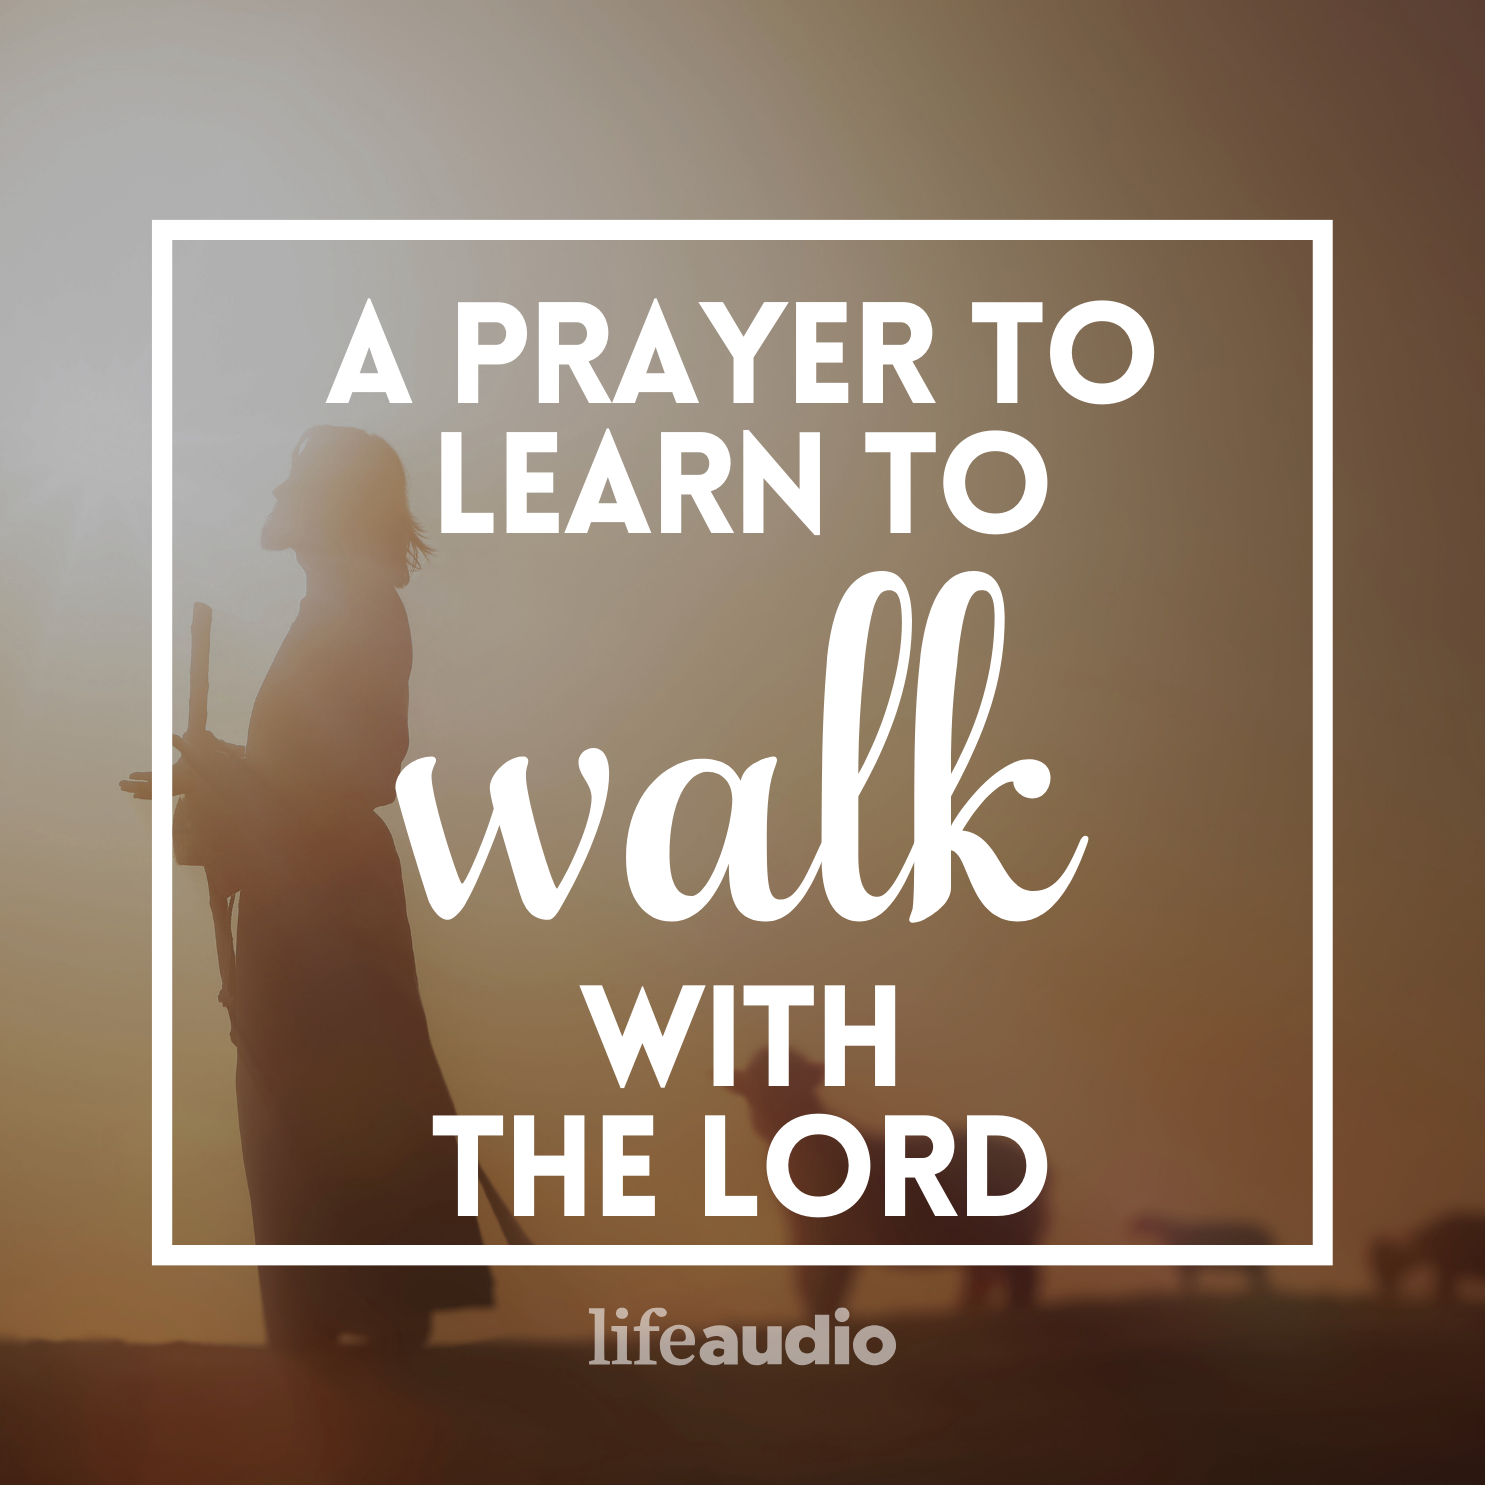 A Prayer to Learn to Walk with the Lord